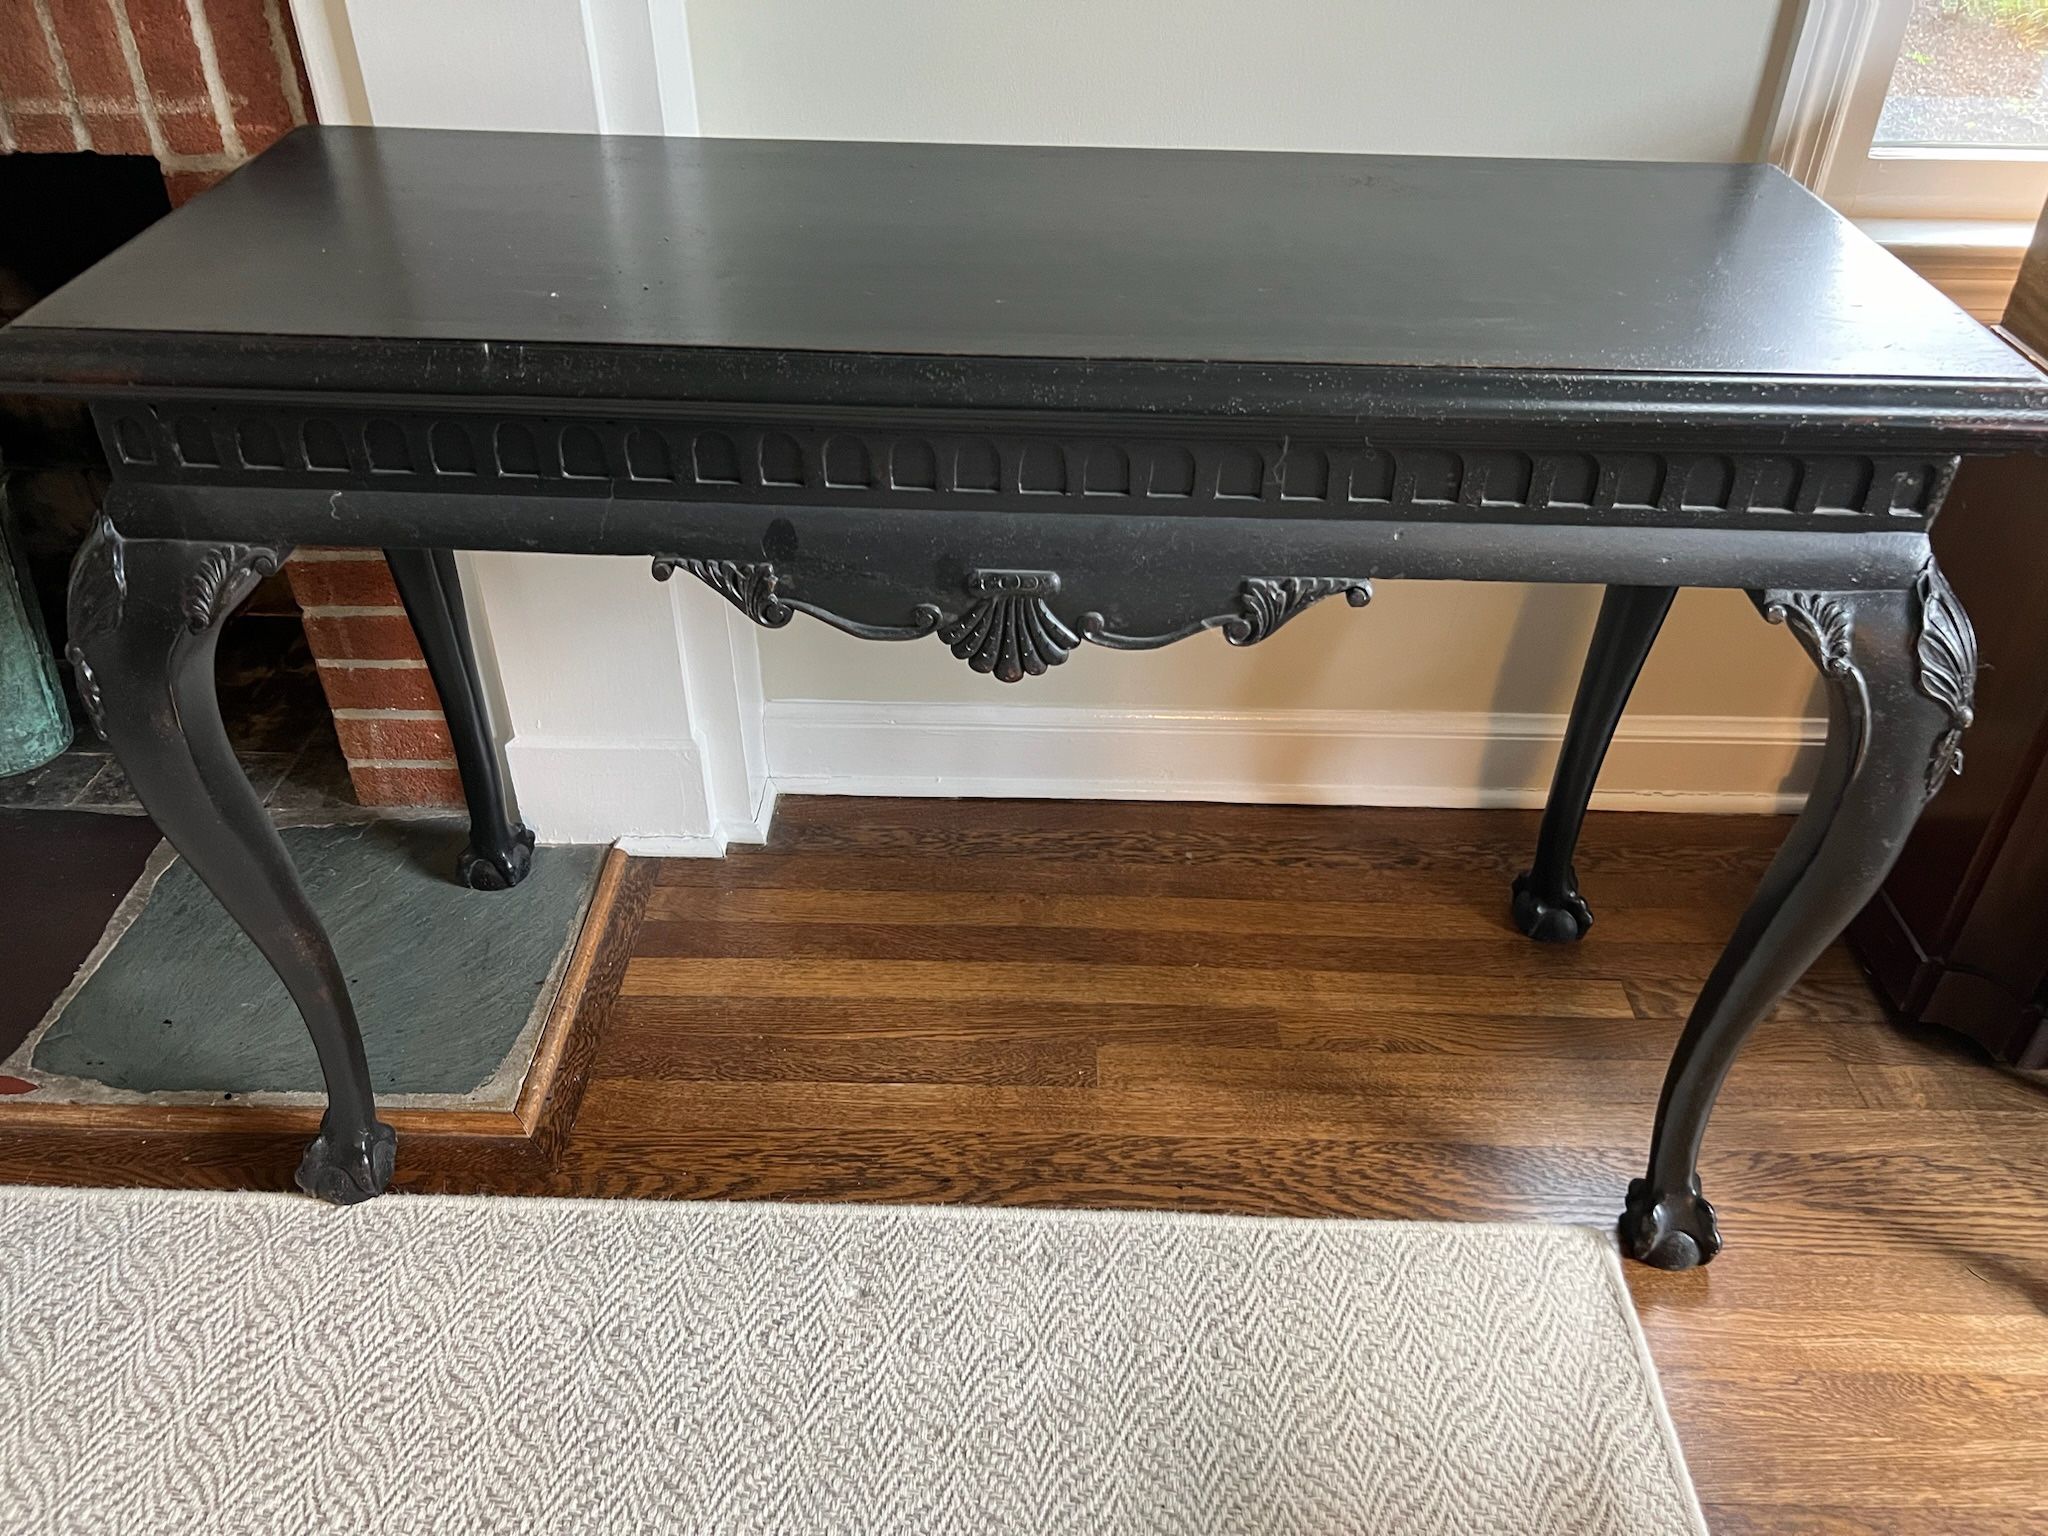 Black Distressed Console Table in Very Good Condition Shell detailing and claw feet. Measures 20”d x 50”w x 32”h. Smoke and pet free household